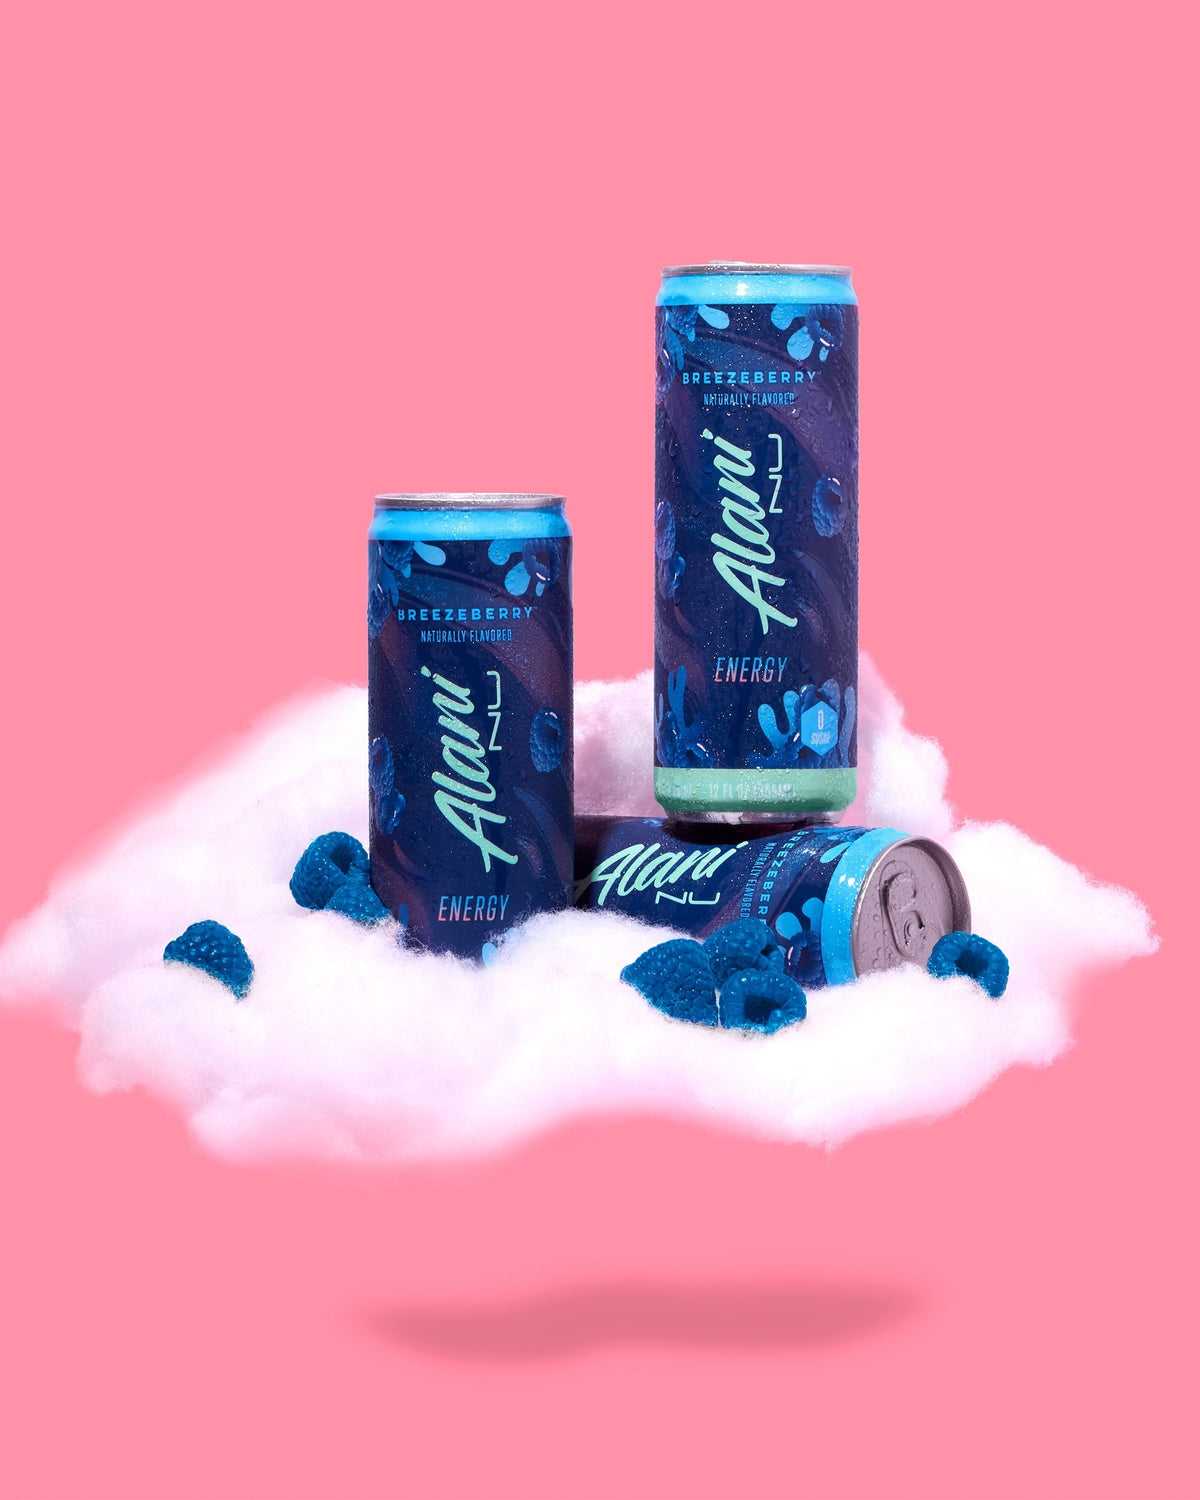 a couple of cans of Energy Drink - Breezeberry sitting on top of a cloud.